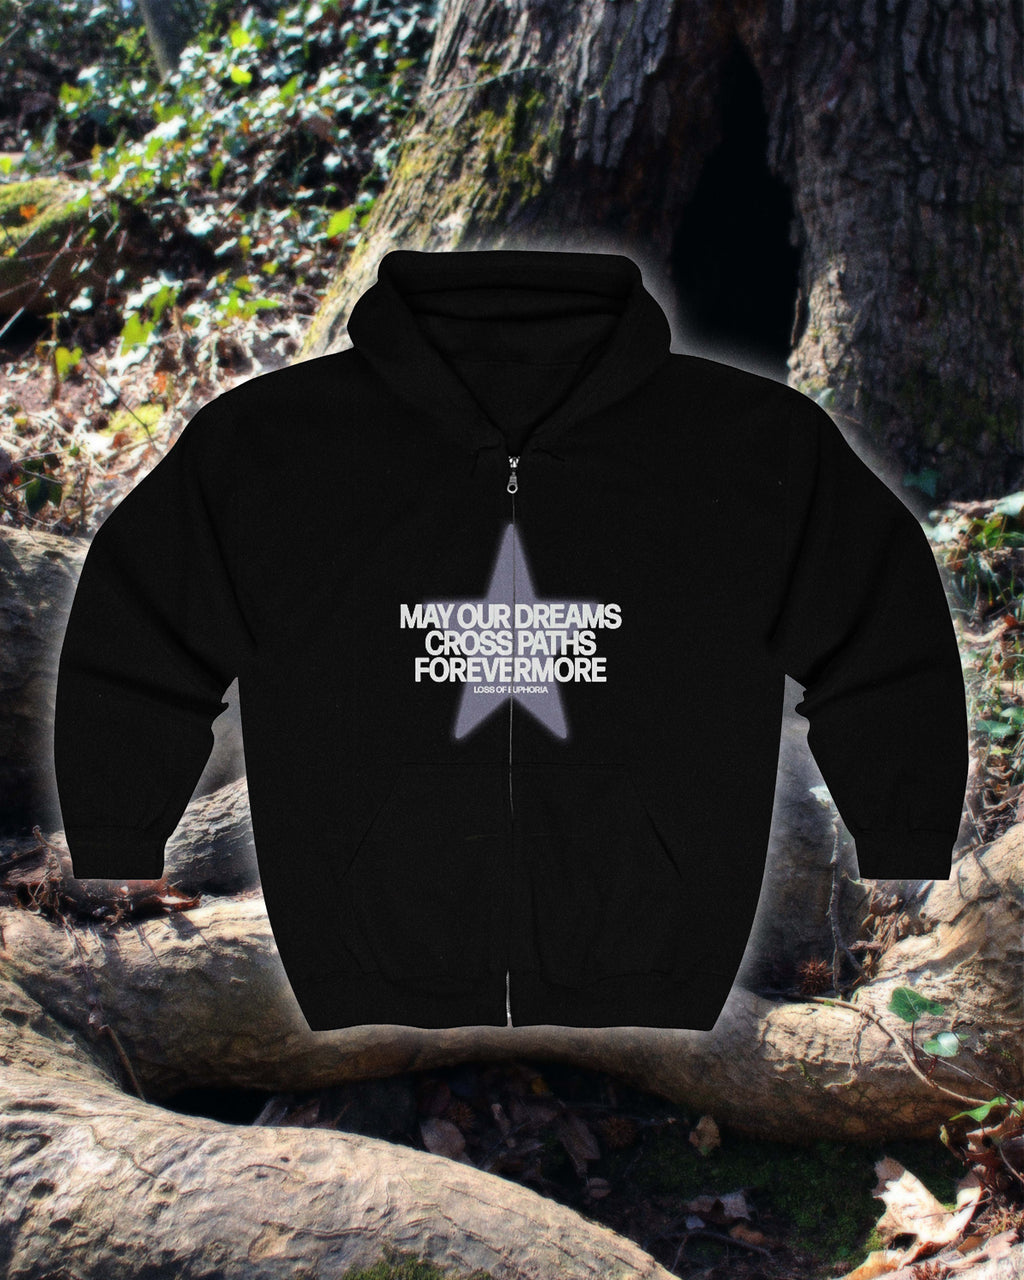 FOREVERMORE, a zip-up hoodie.